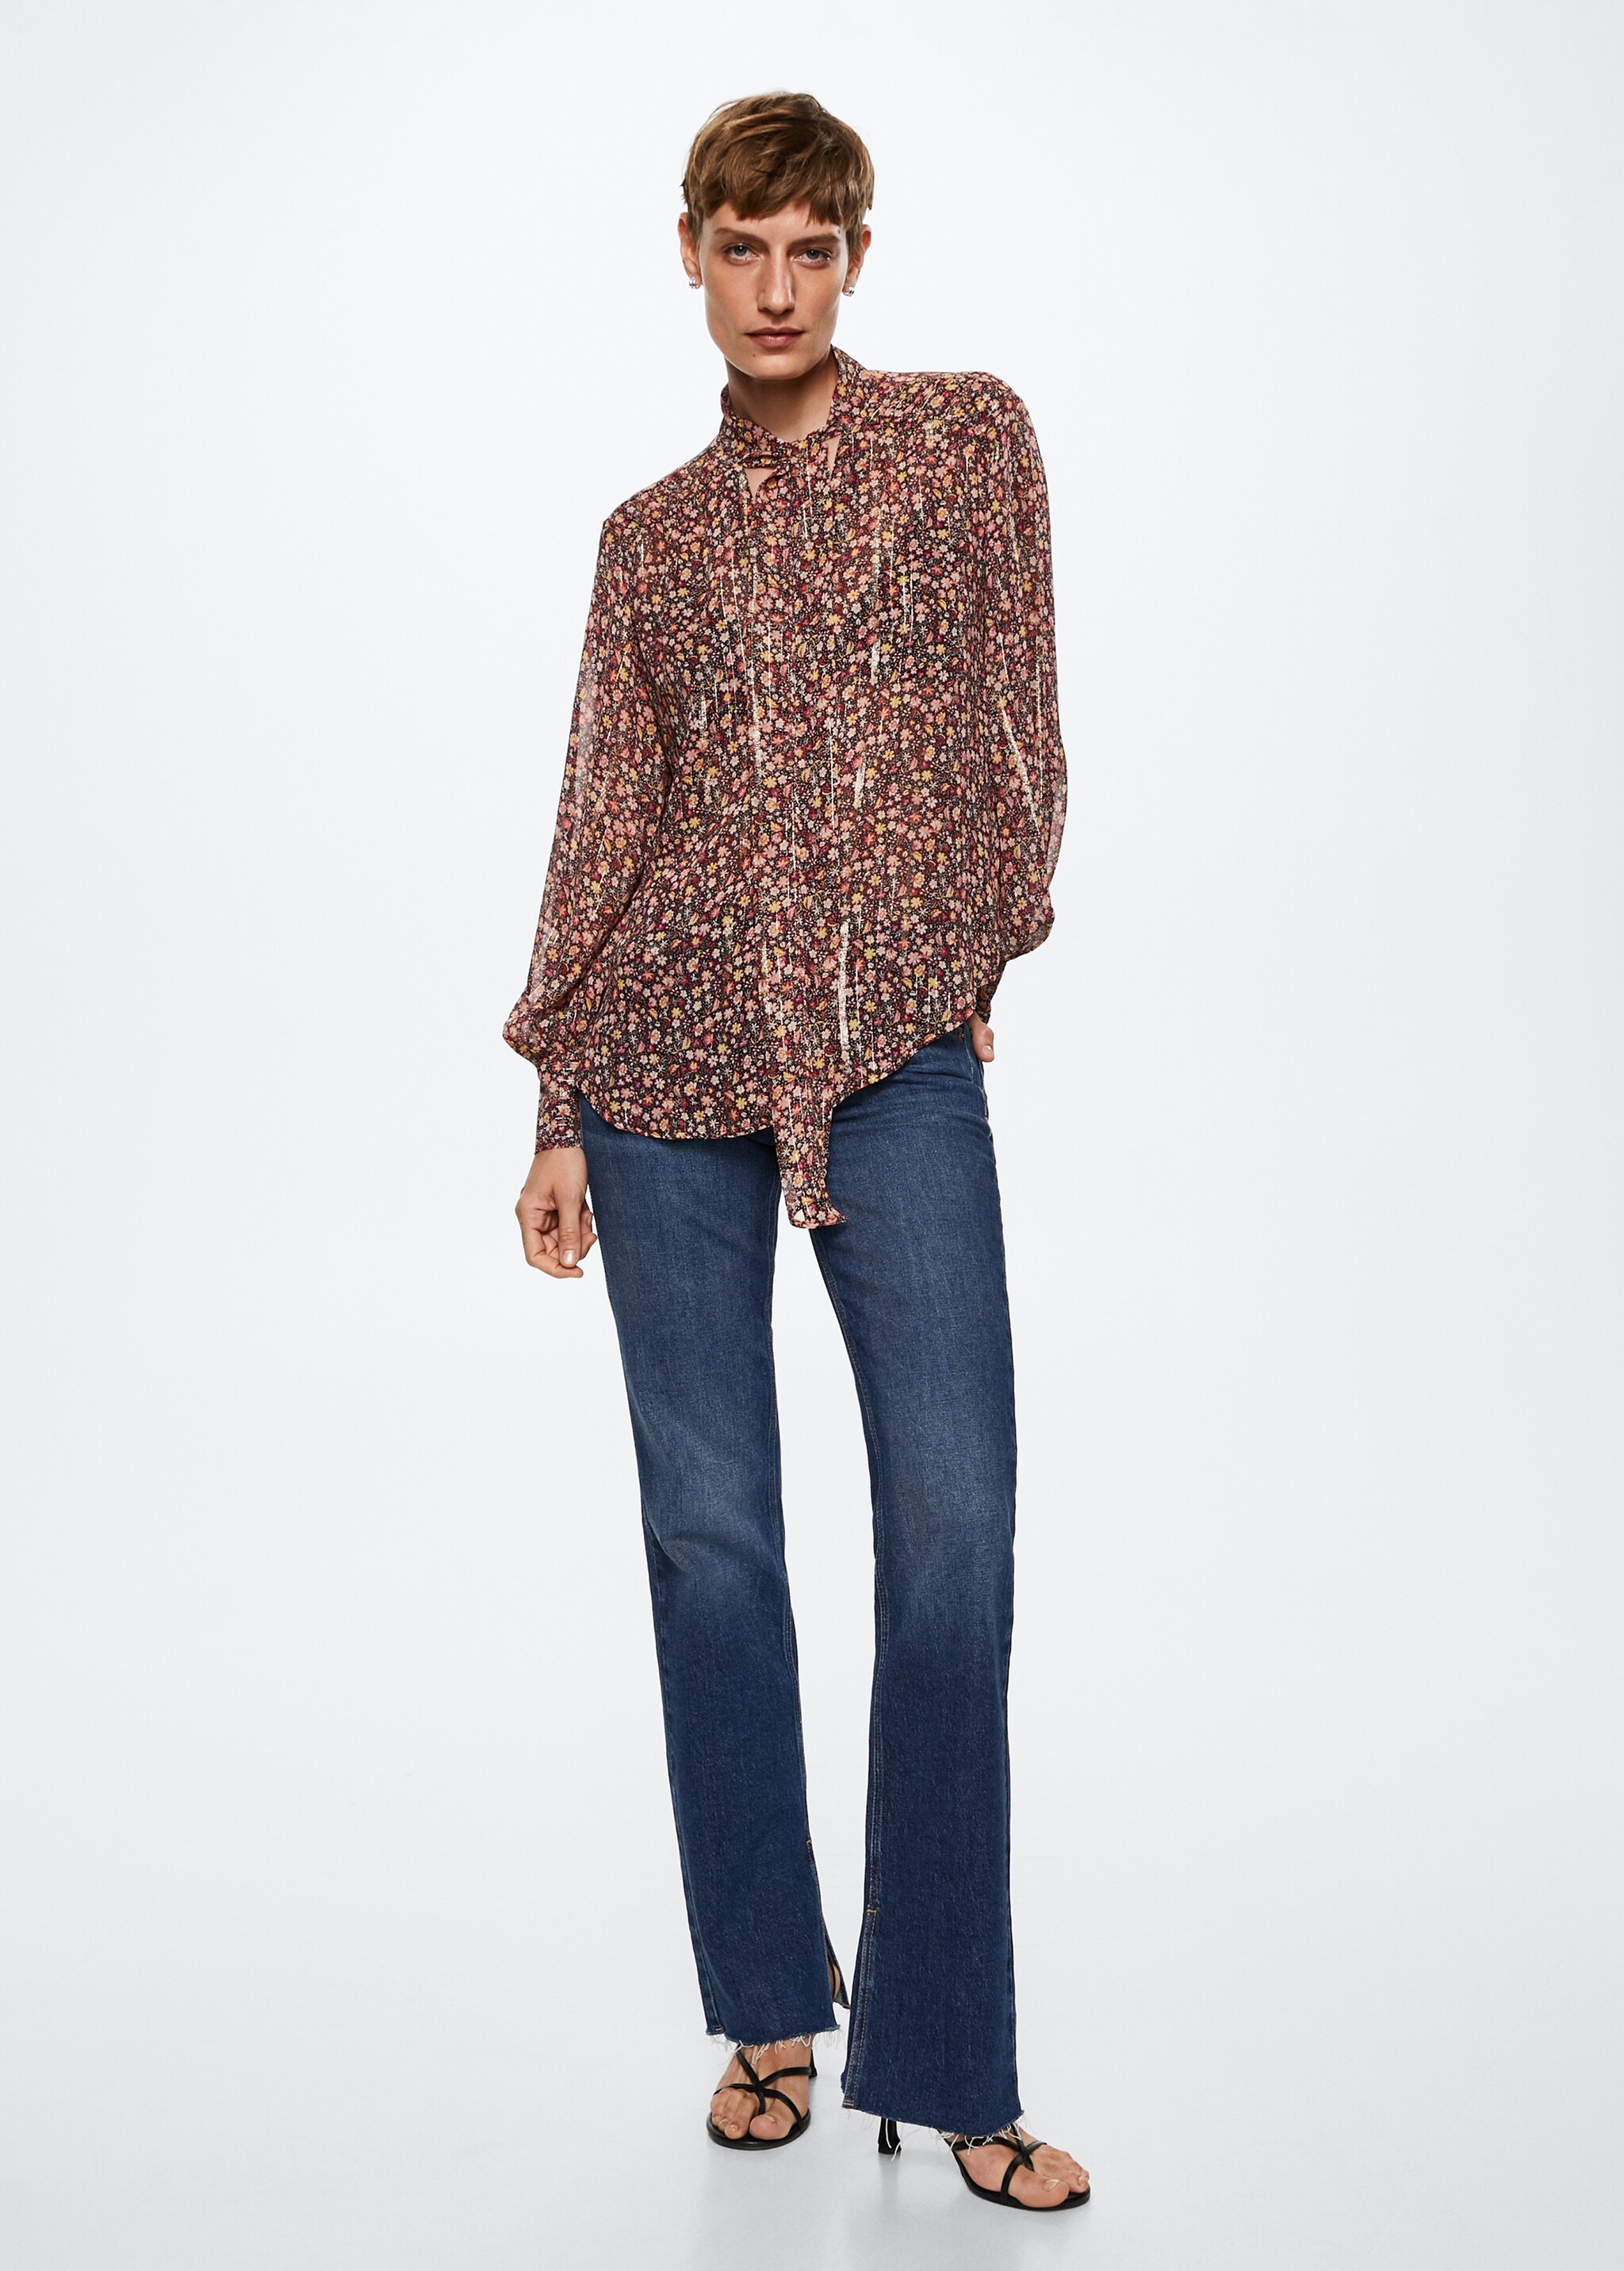 Bow printed blouse - General plane